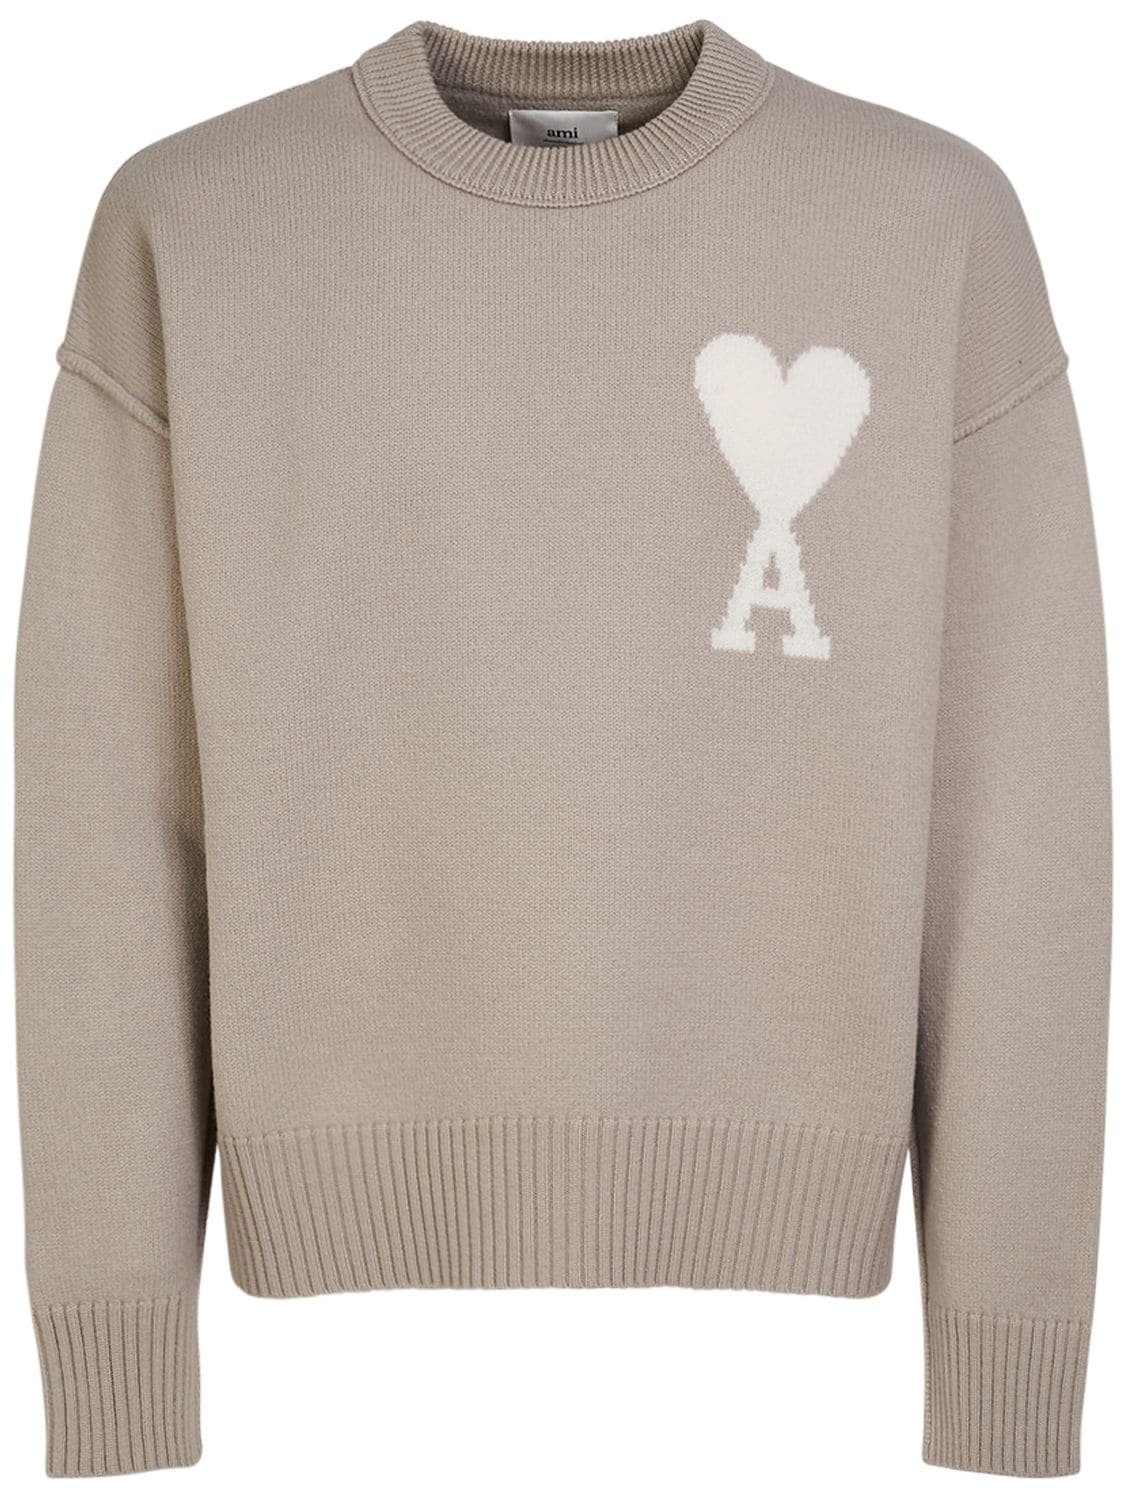 Image of Adc Felted Wool Knit Sweater